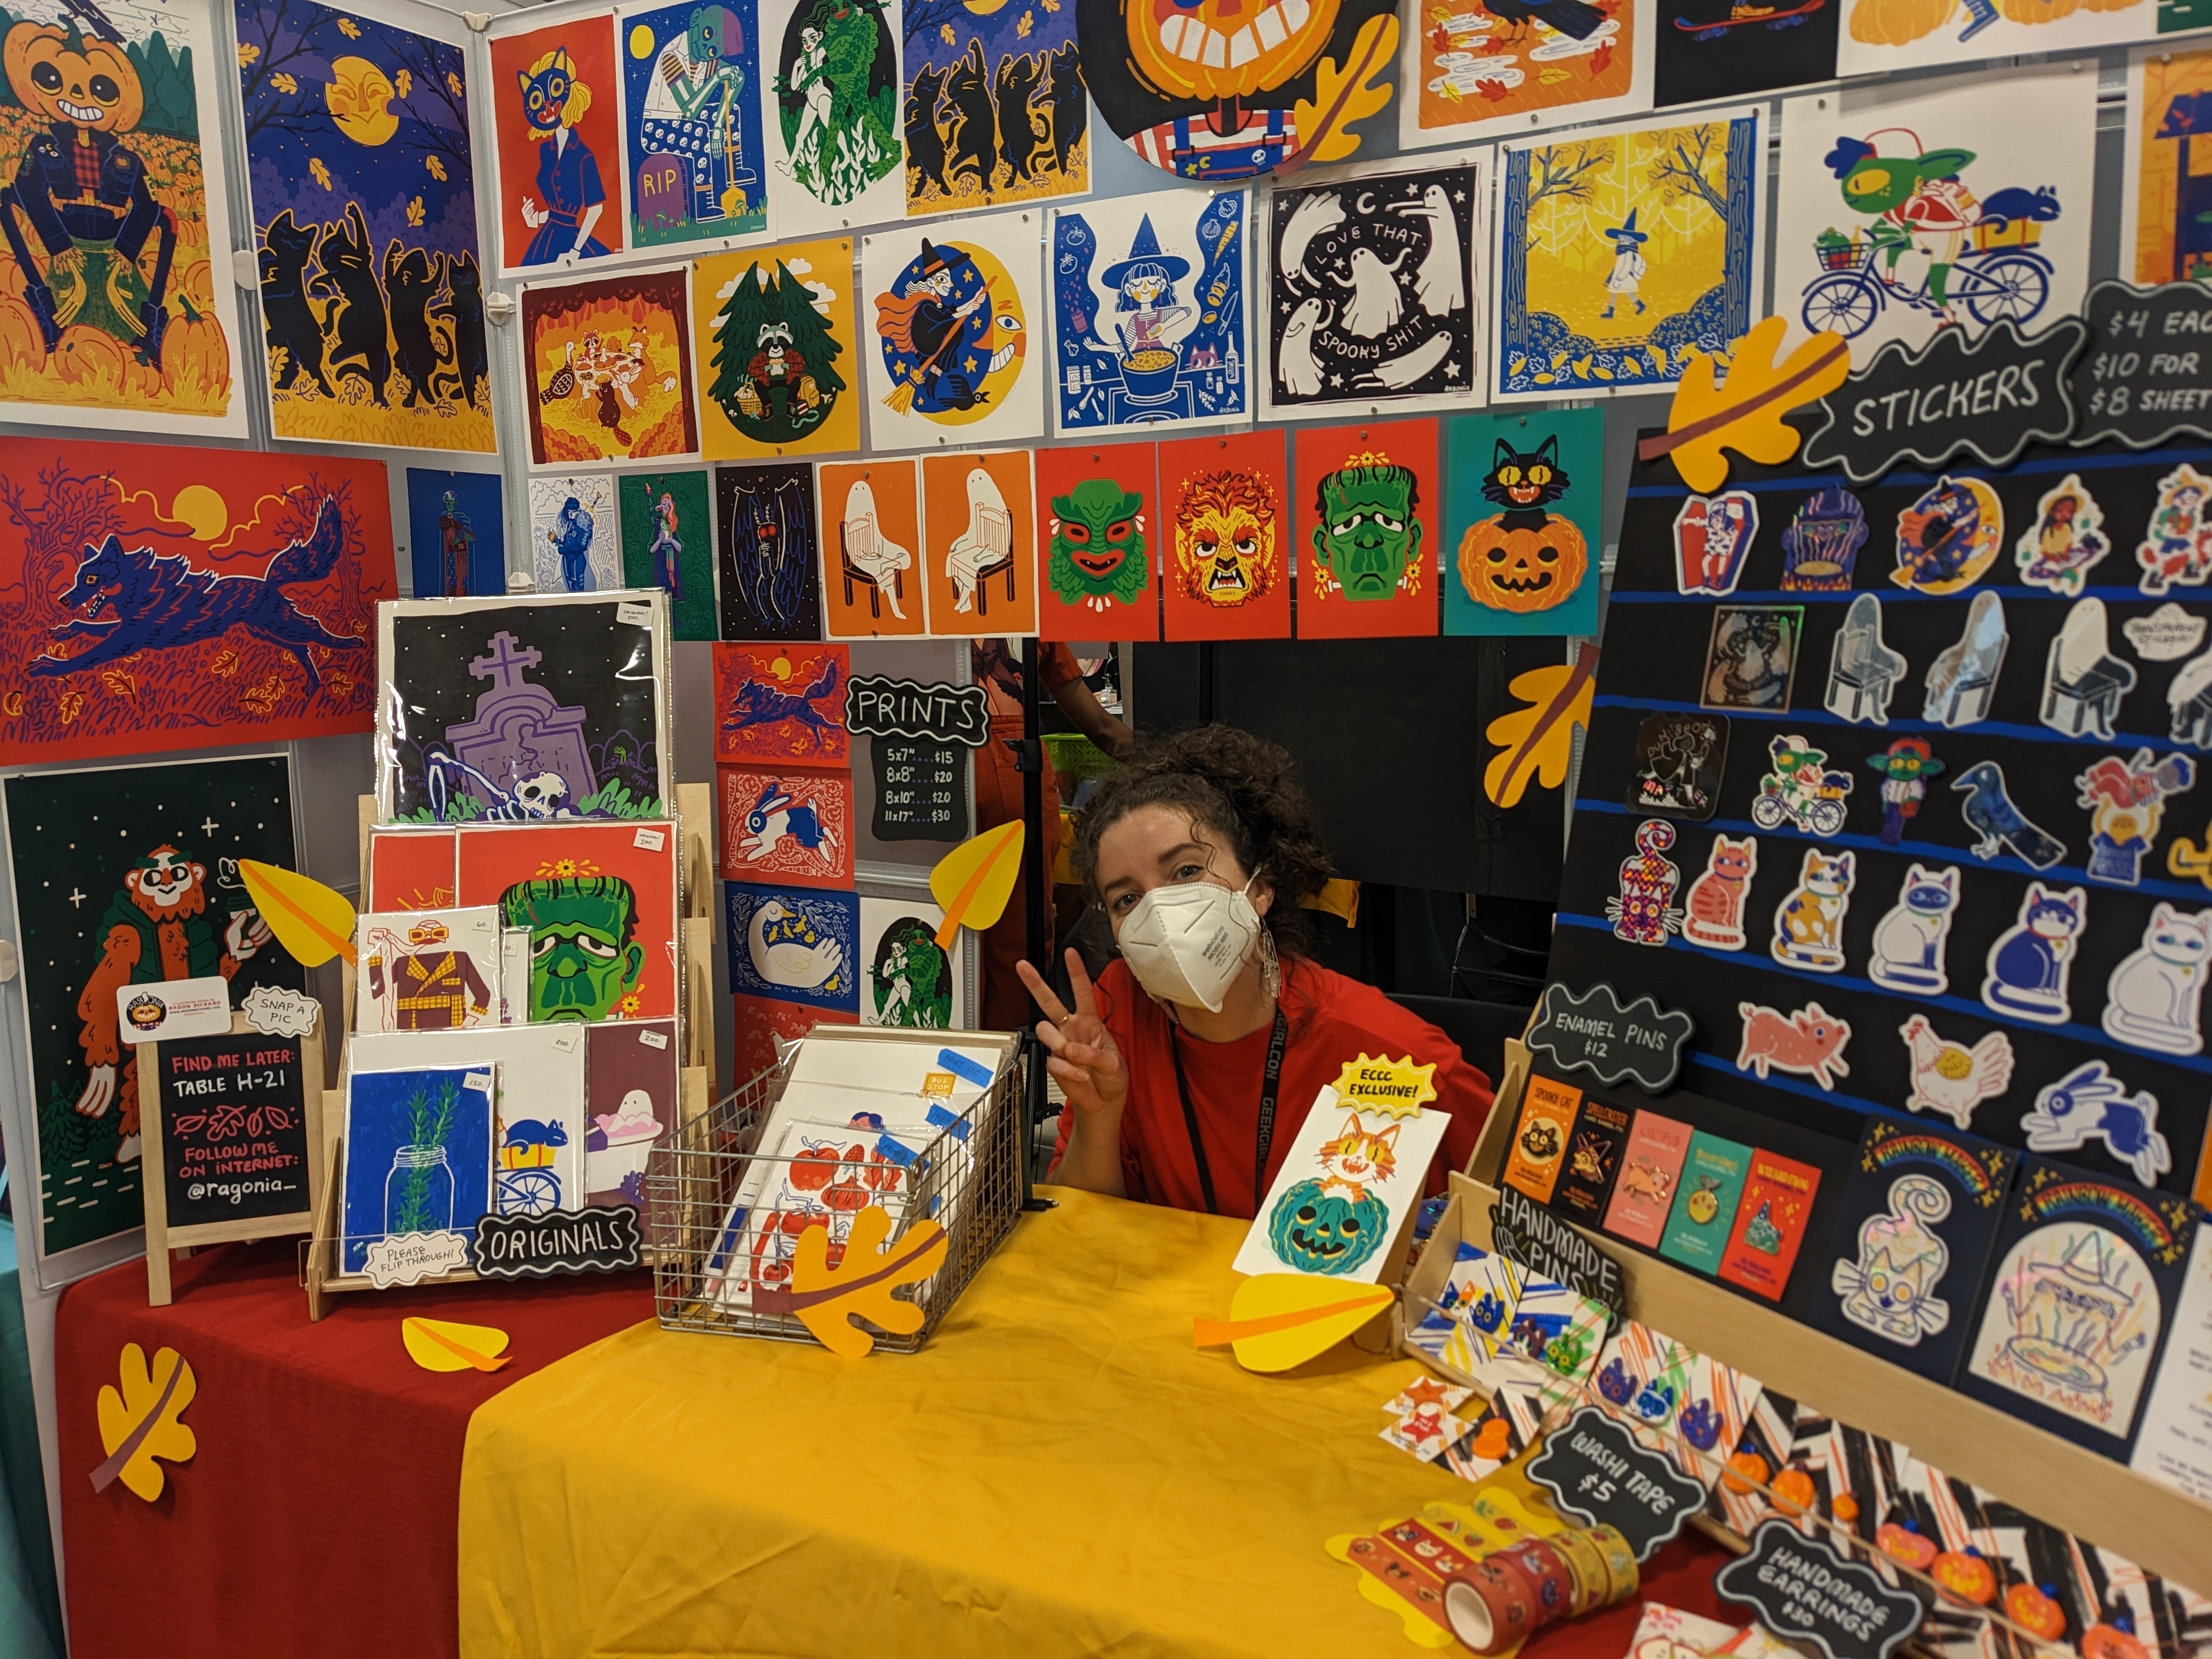 Photograph of artist sitting inside her booth